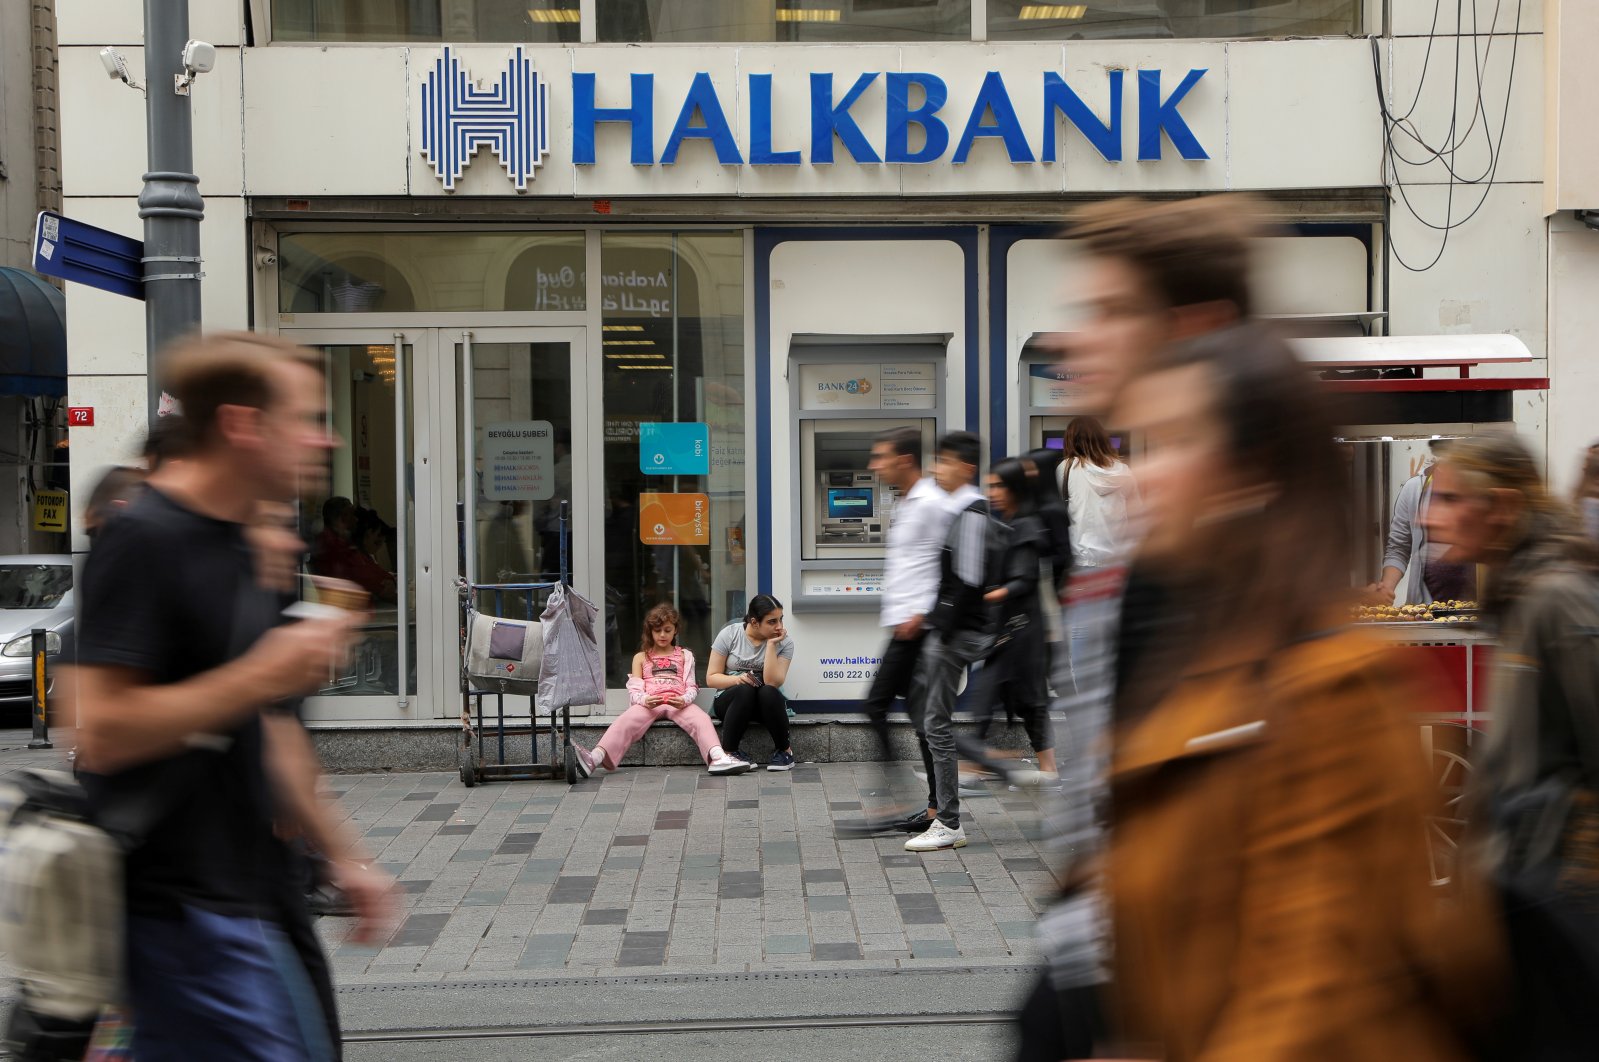 People walk past a branch of Halkbank in central Istanbul, Turkey, Oct. 16, 2019. (Reuters Photo)